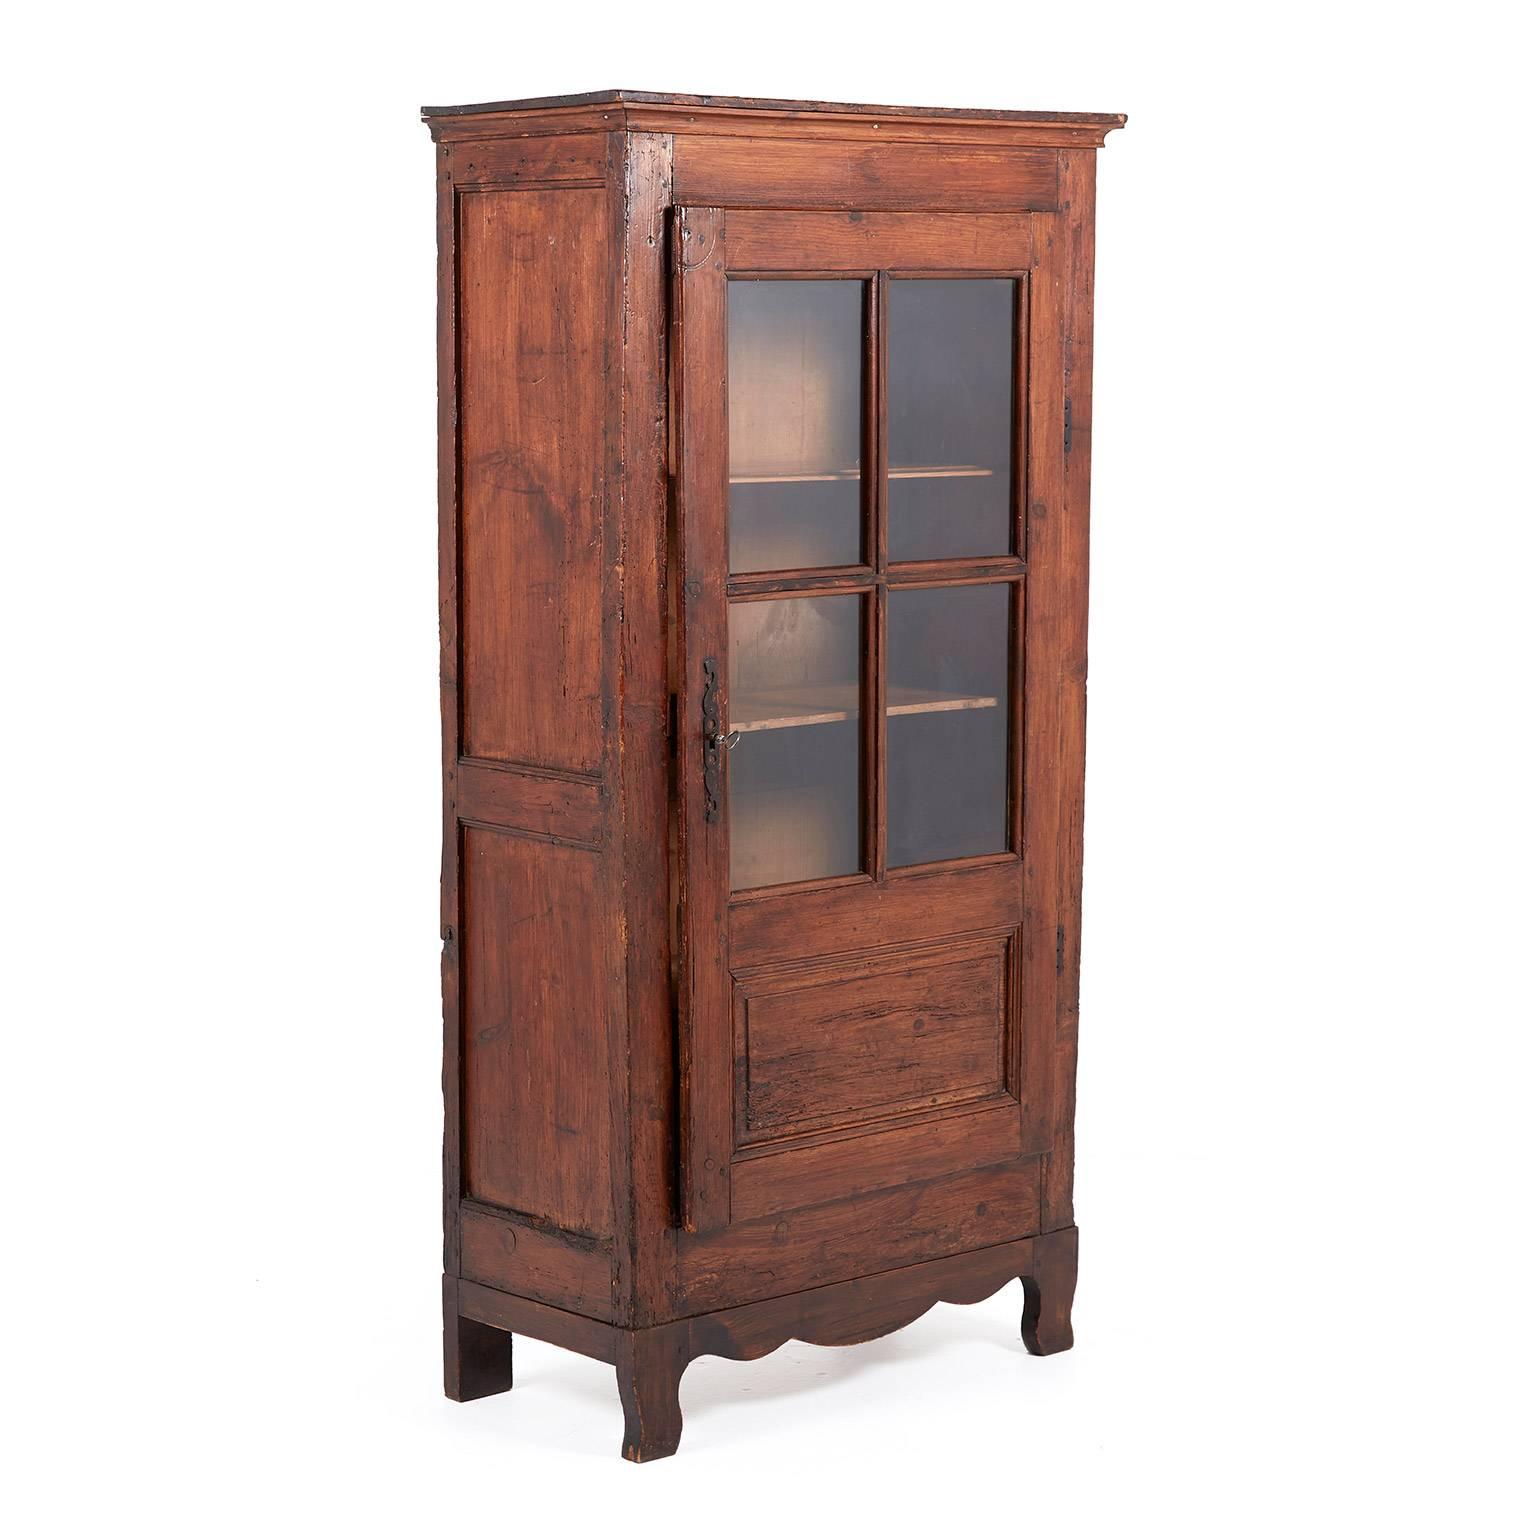 Small antique country French cabinet, circa 1880. Its small footprint makes it ideal for a number of different rooms in your home.



